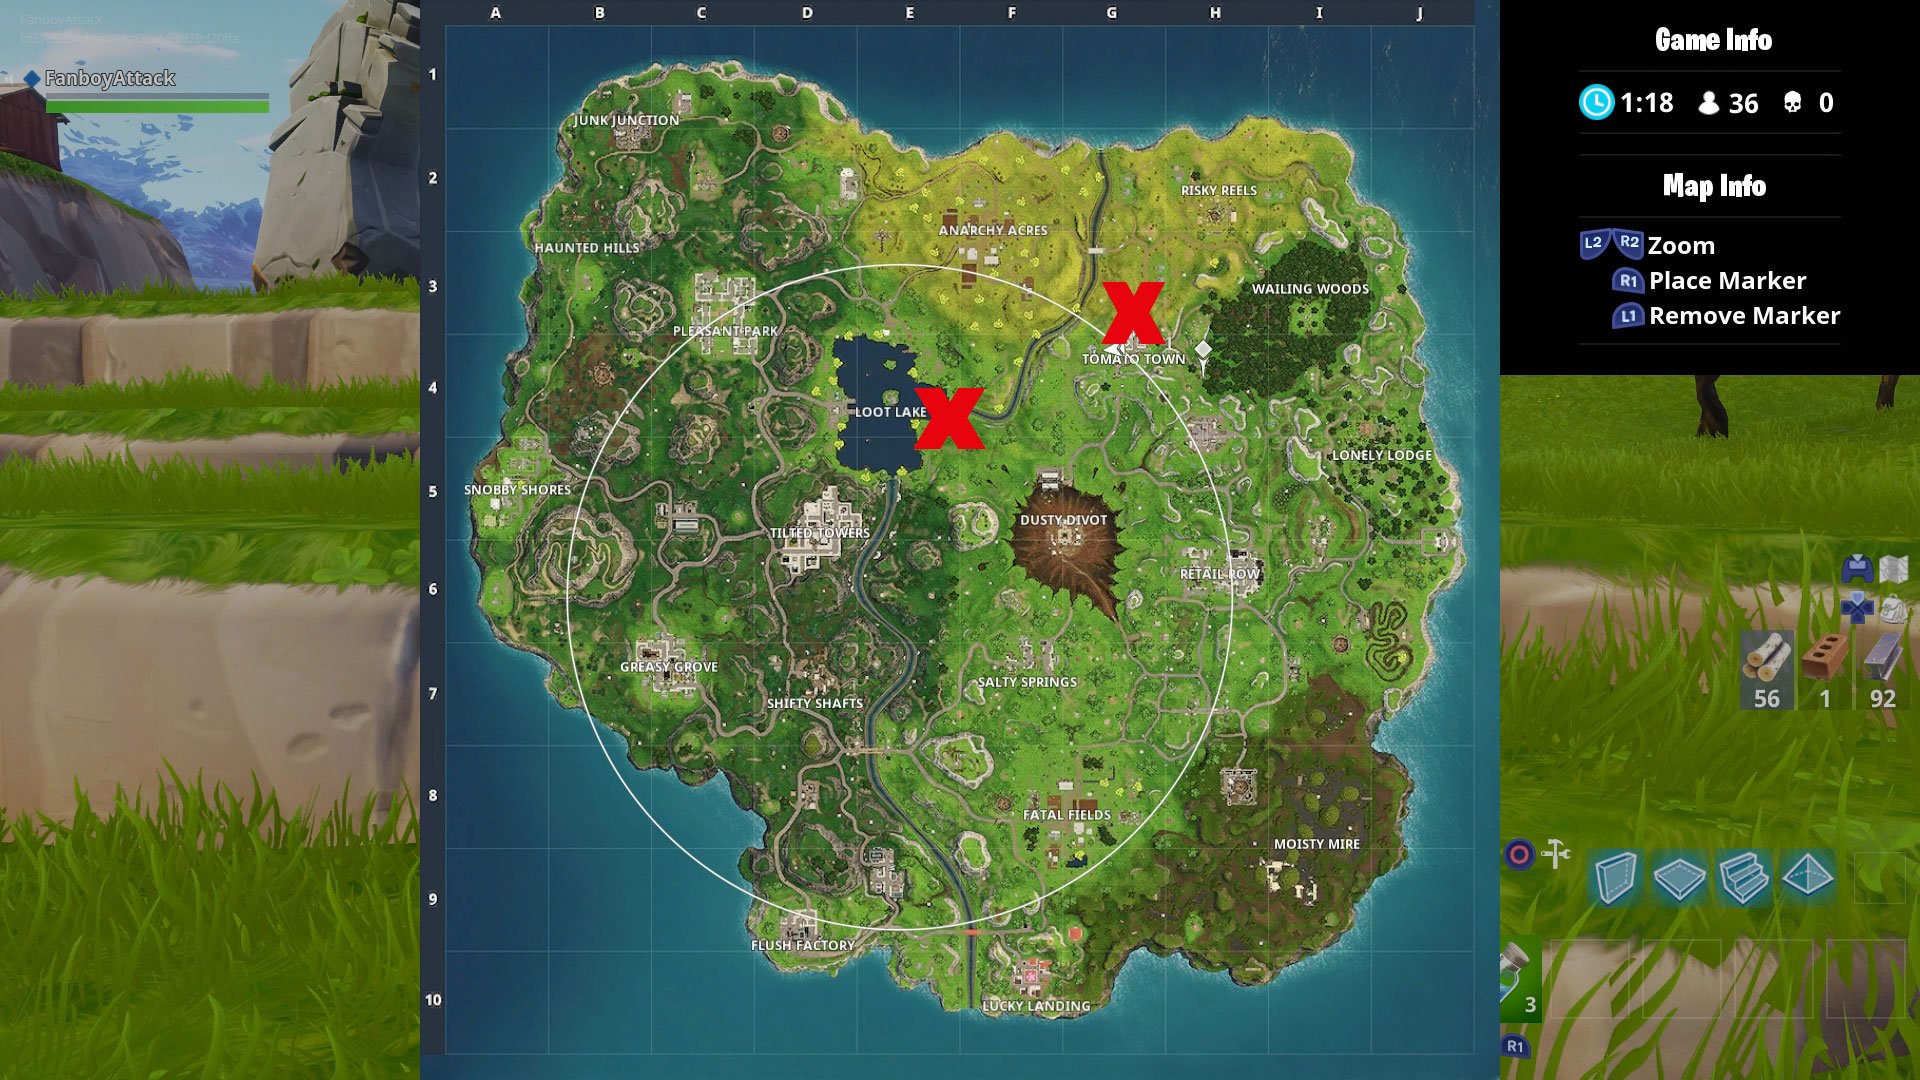 Treasure Chest Map Fortnite Tomato Town Fortnite Battle Royale Tomato Town Treasure Map Location Attack Of The Fanboy